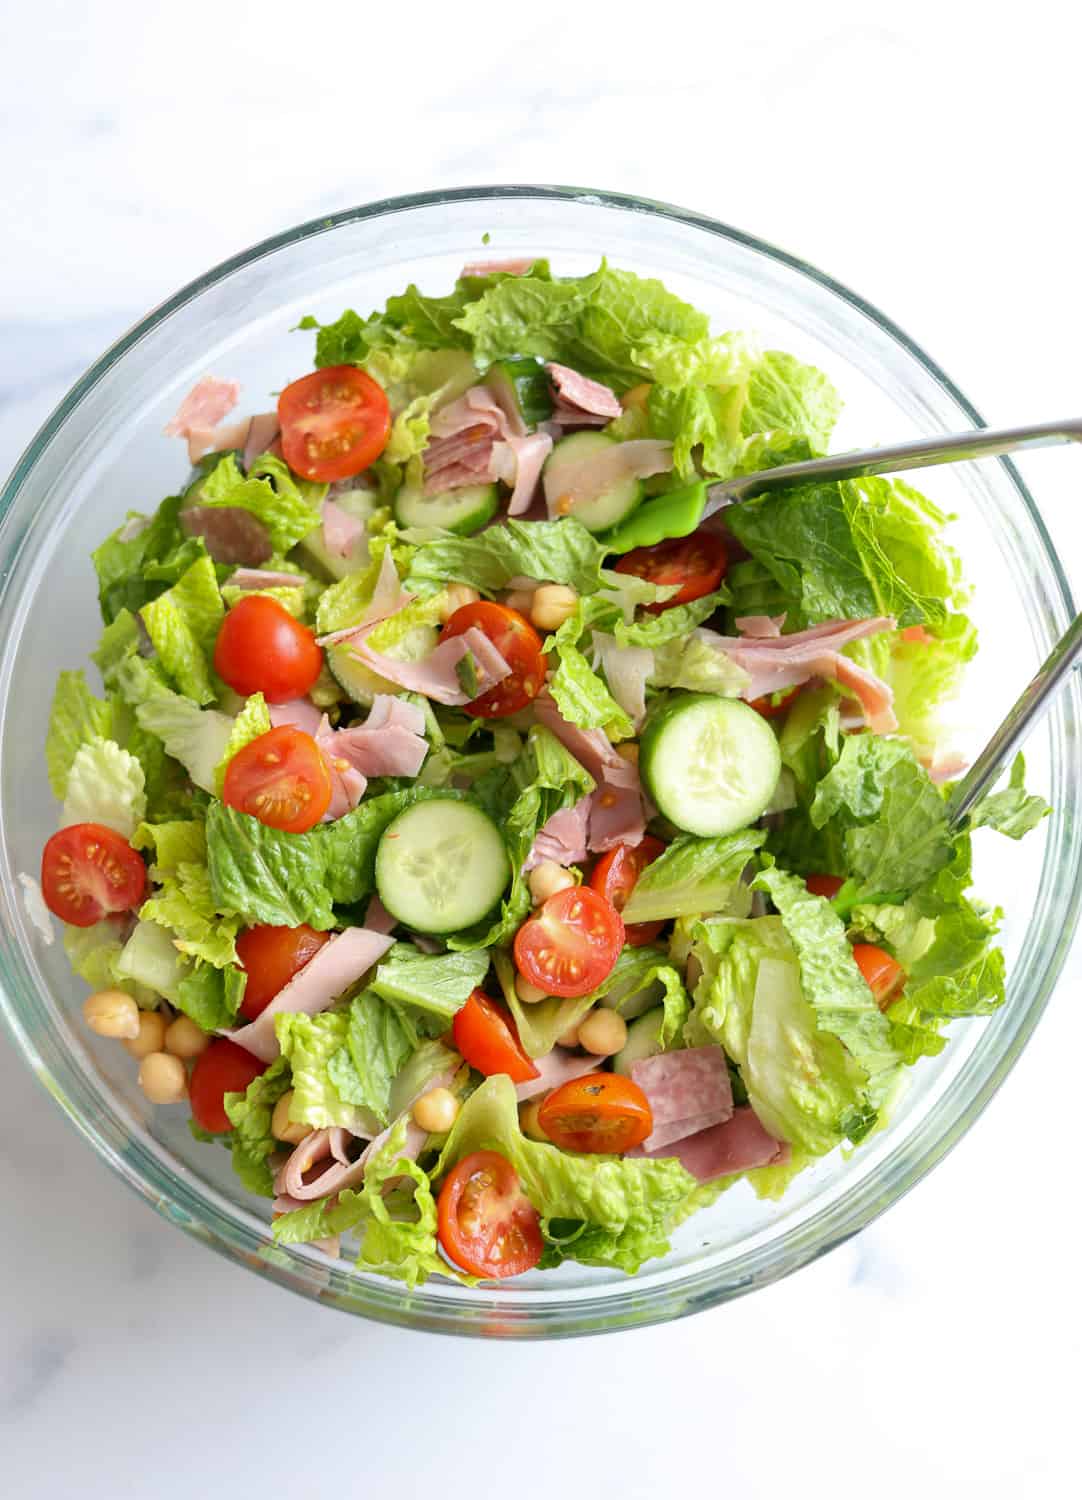 Large mixing bowl with chopped romaine, cucumbers, tomatoes, chickpeas, and deli meat.